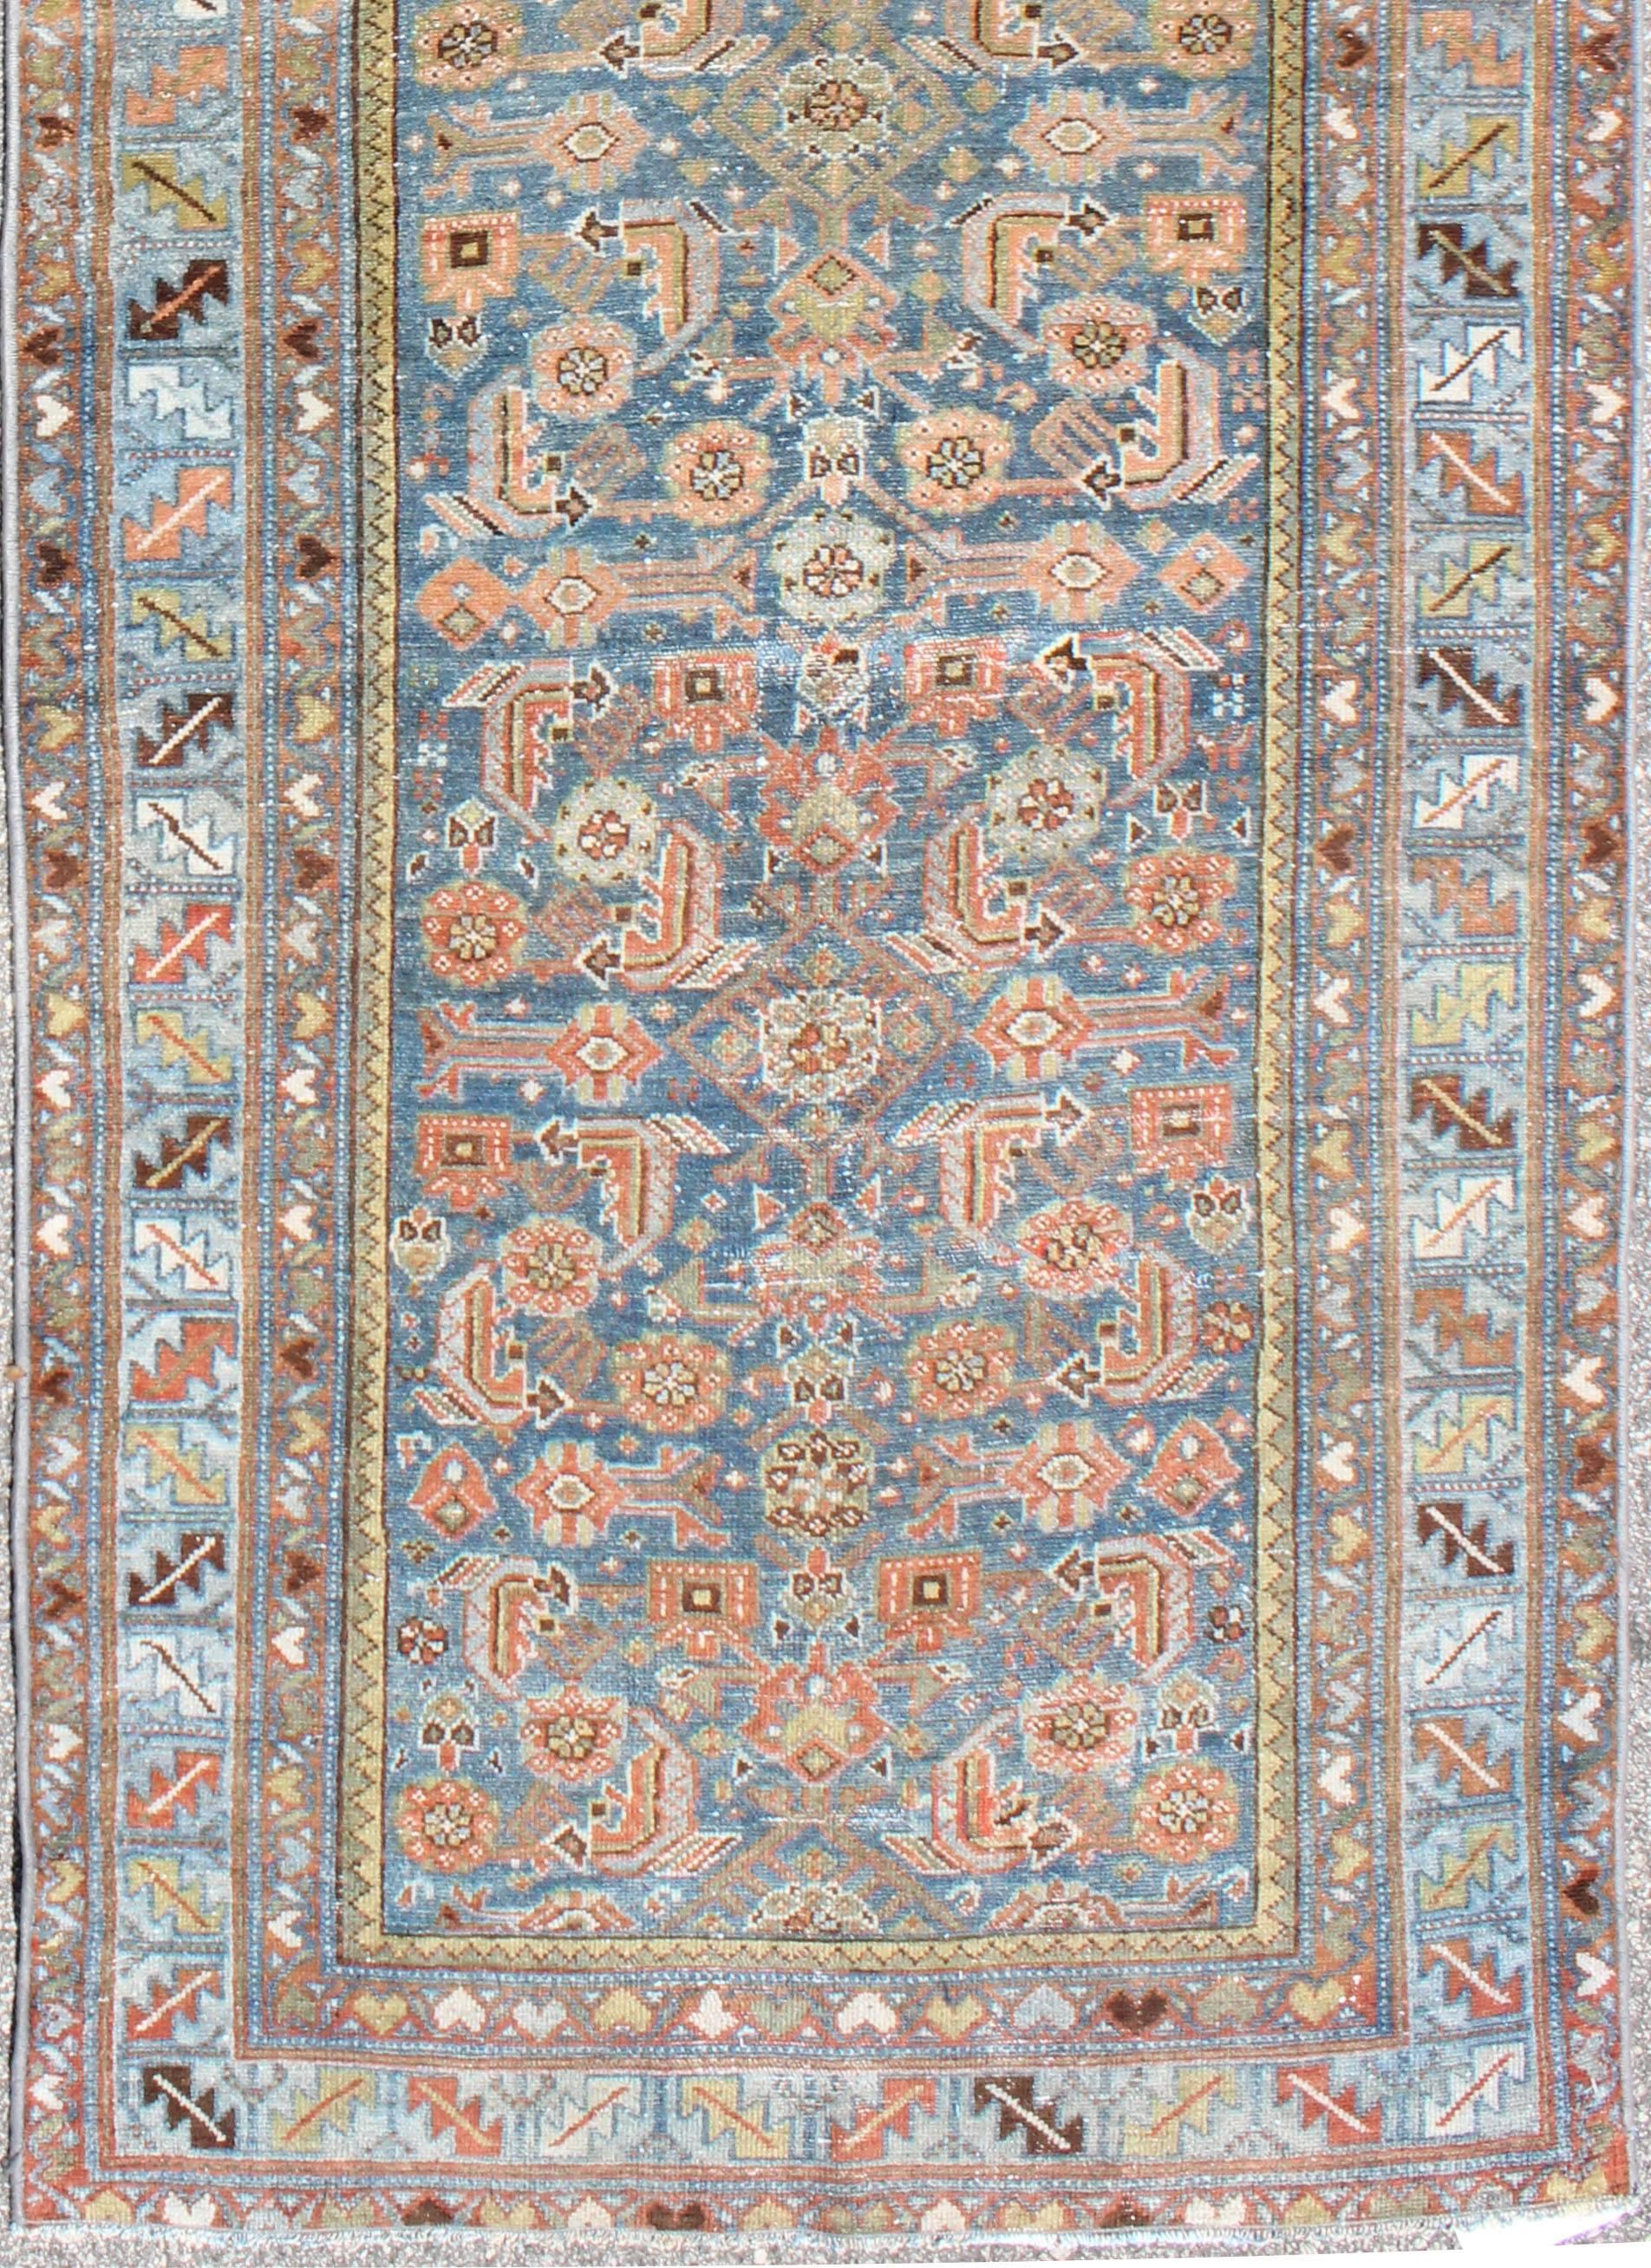 Antique Persian Malayer runner with geometrics in light blue and salmon pink, rug na-170200, country of origin / type: Iran / Malayer, circa 1910.

This magnificent antique Persian Malayer runner (circa 1910) bears a beautiful, all-over sub